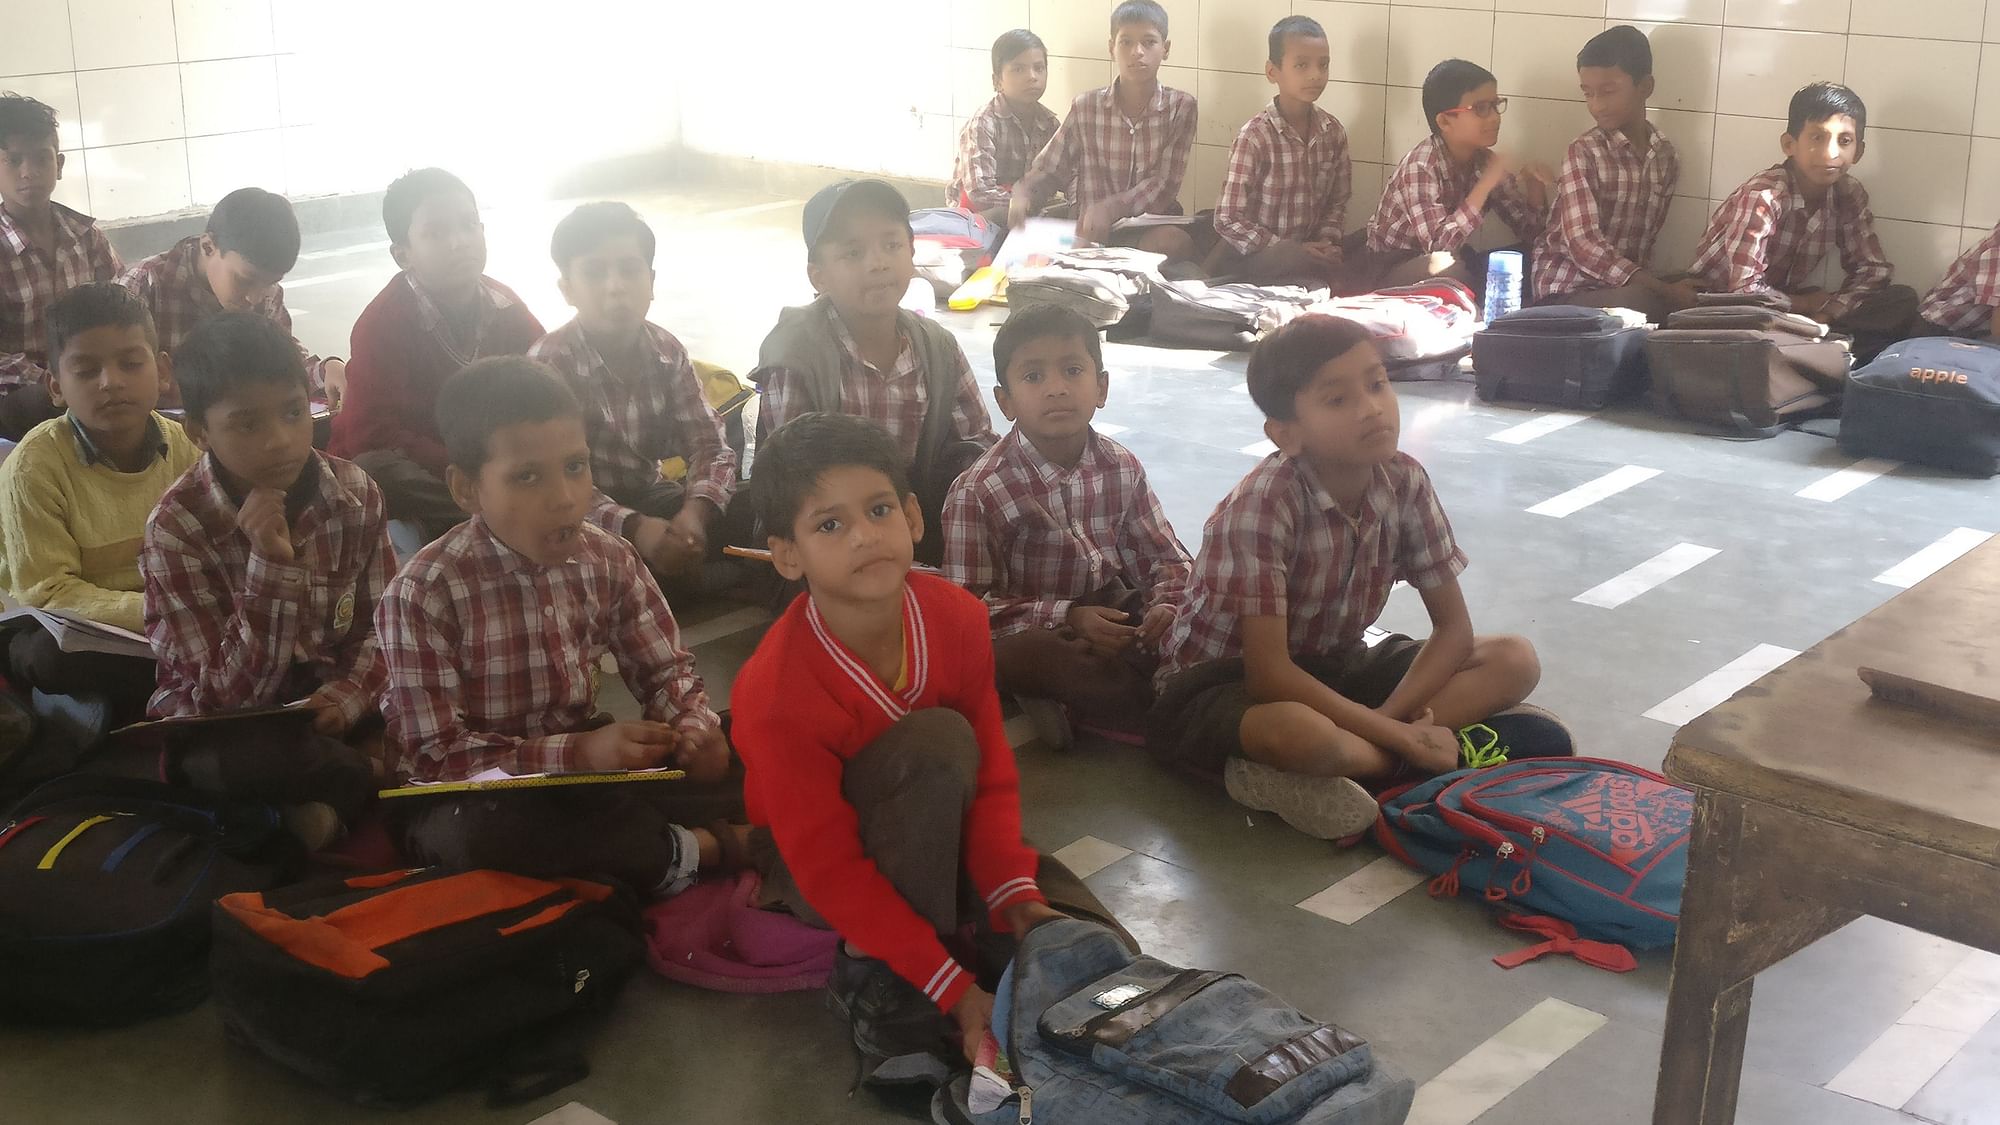 Class 2 children made to sit on floor at an MCD school in Jahangirpuri.